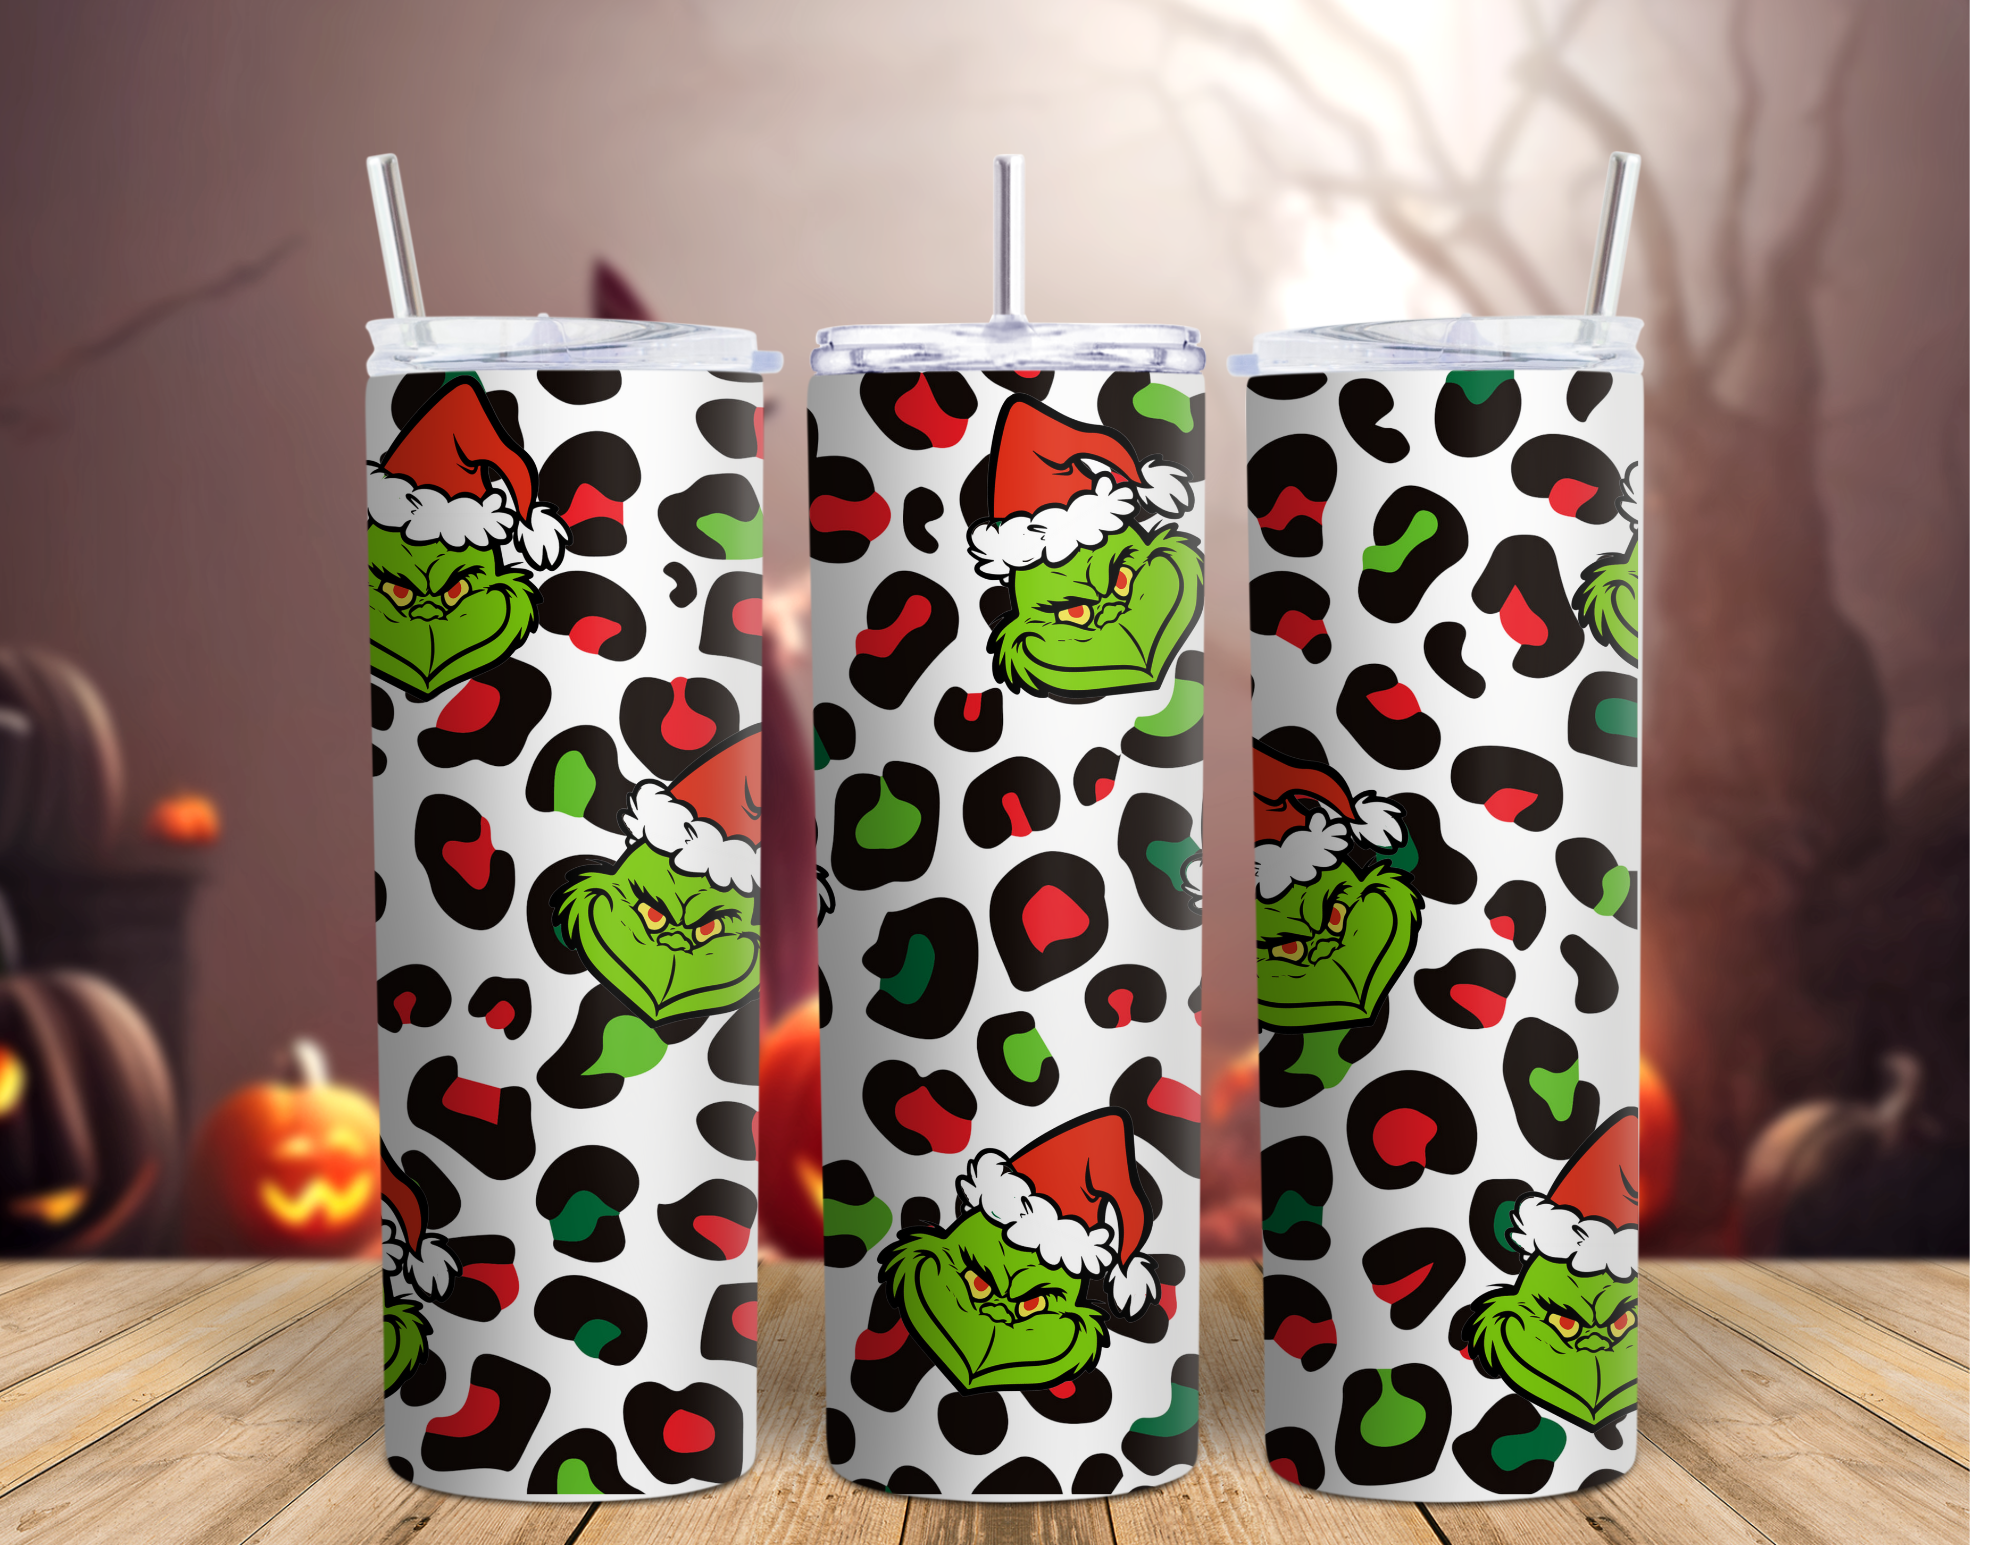 The Grinch Themed Starbucks Cold Cup